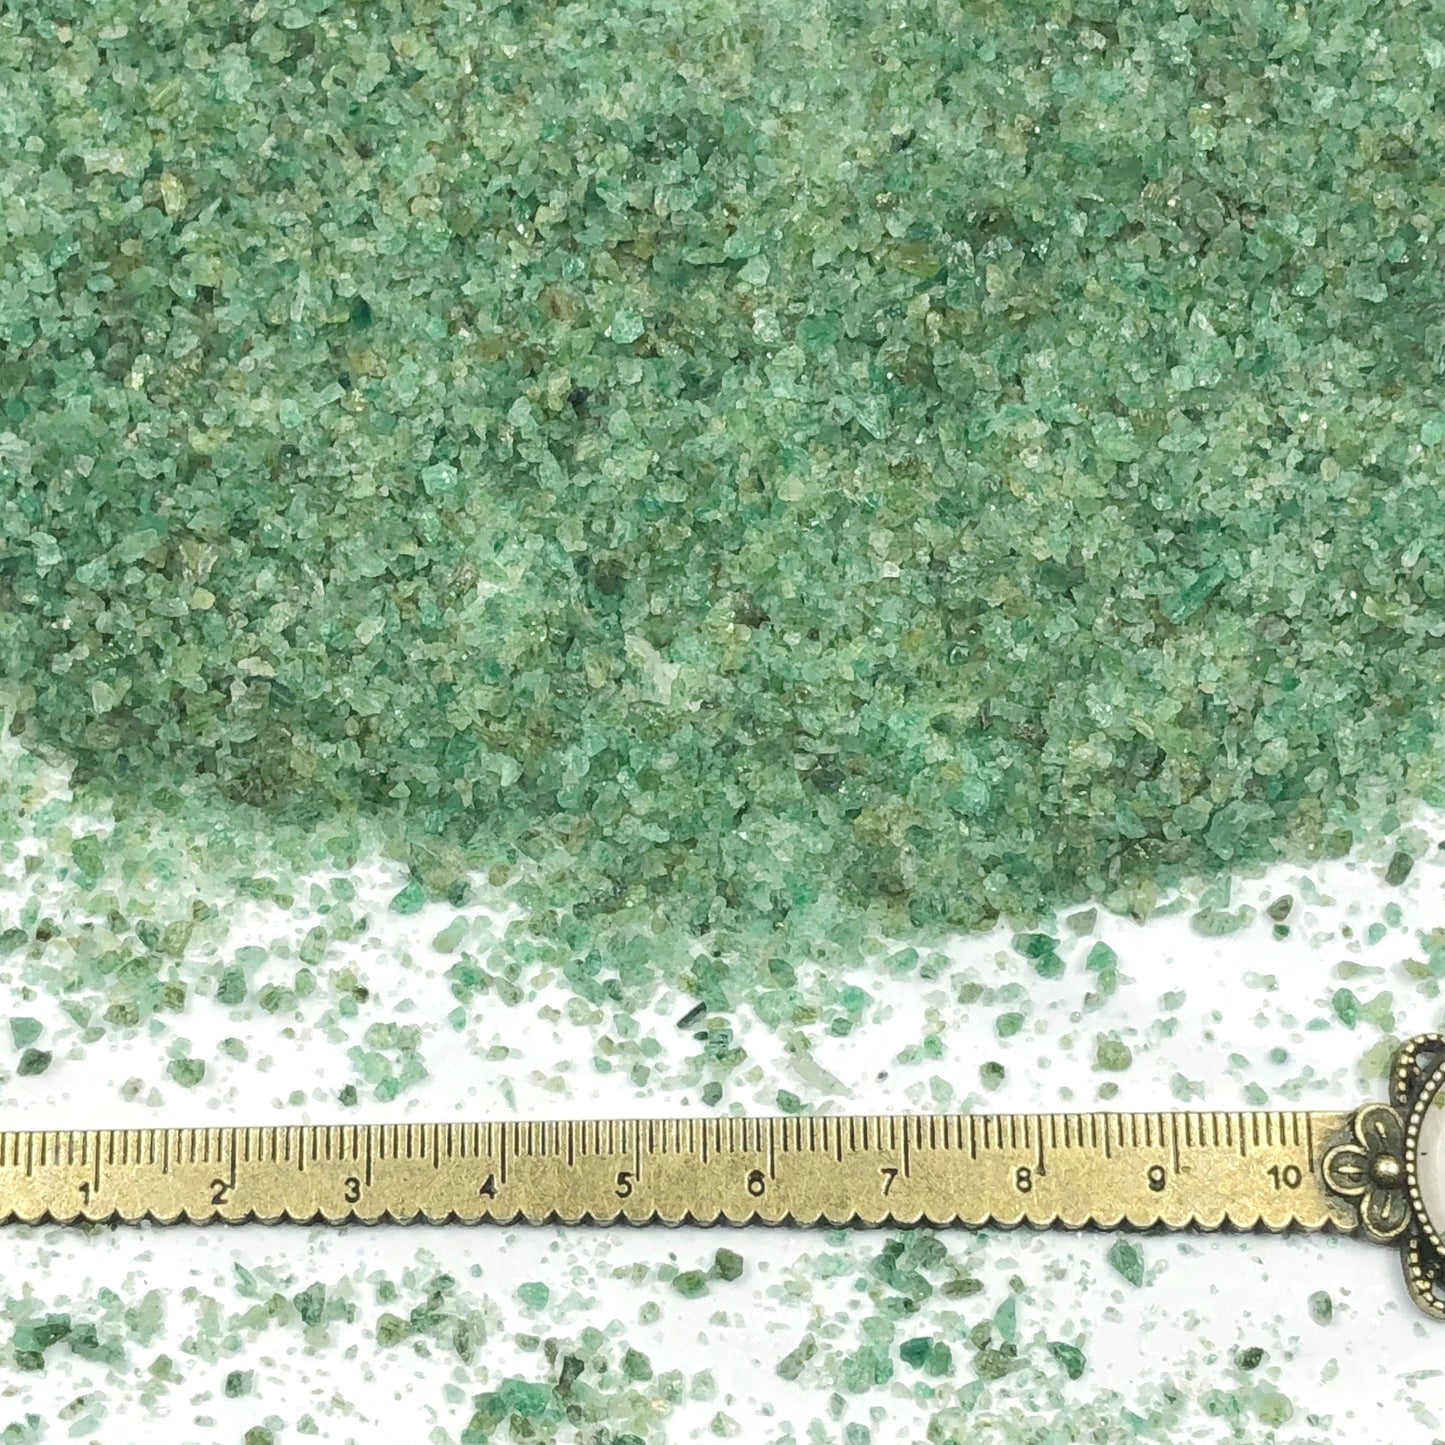 Crushed Green Emerald (Grade A) from India, Medium Crush, Sand Size, 2mm - 0.25mm